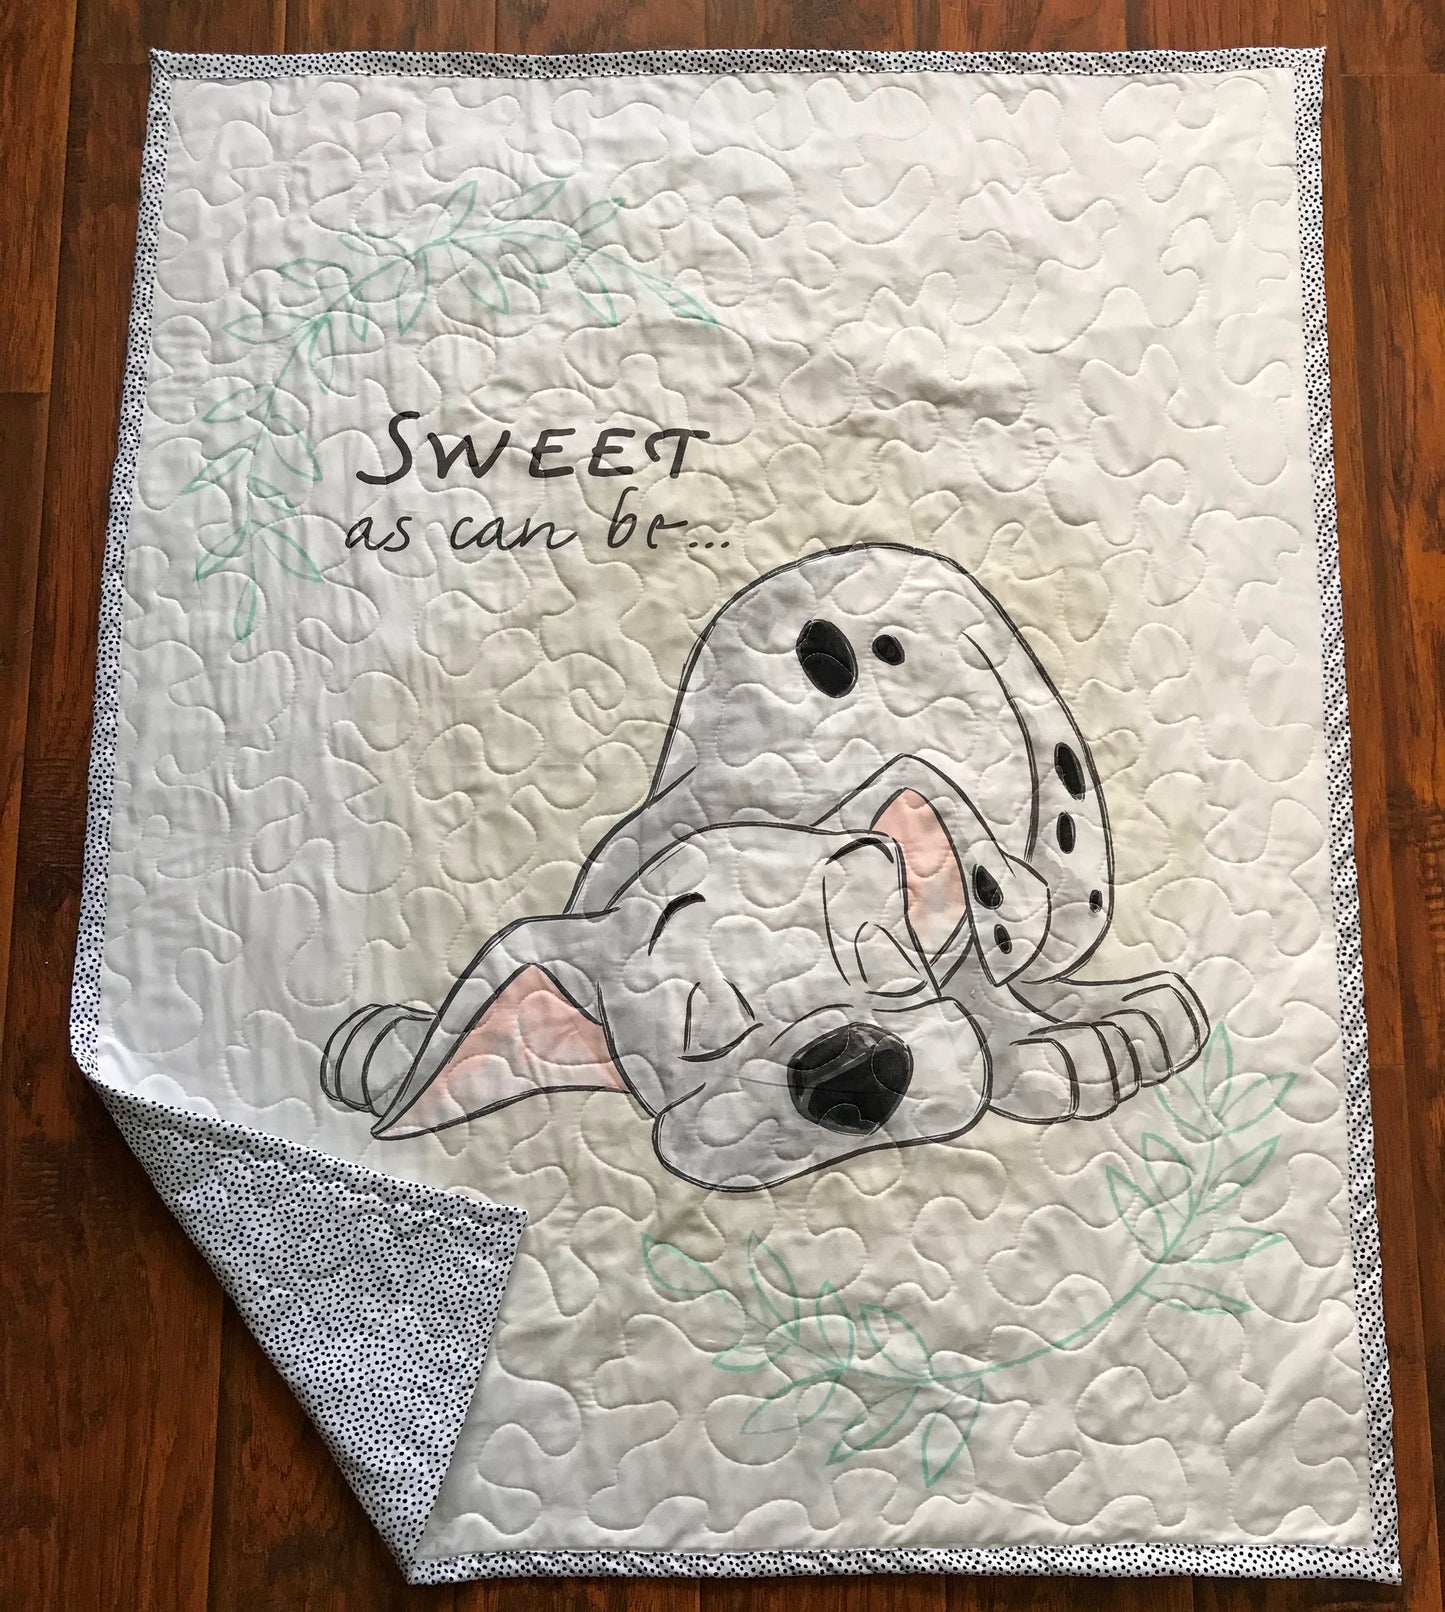 DISNEY CLASSIC Inspired 101 DALMATIANS PUPPY *SWEET AS CAN BE* Quilted Blanket